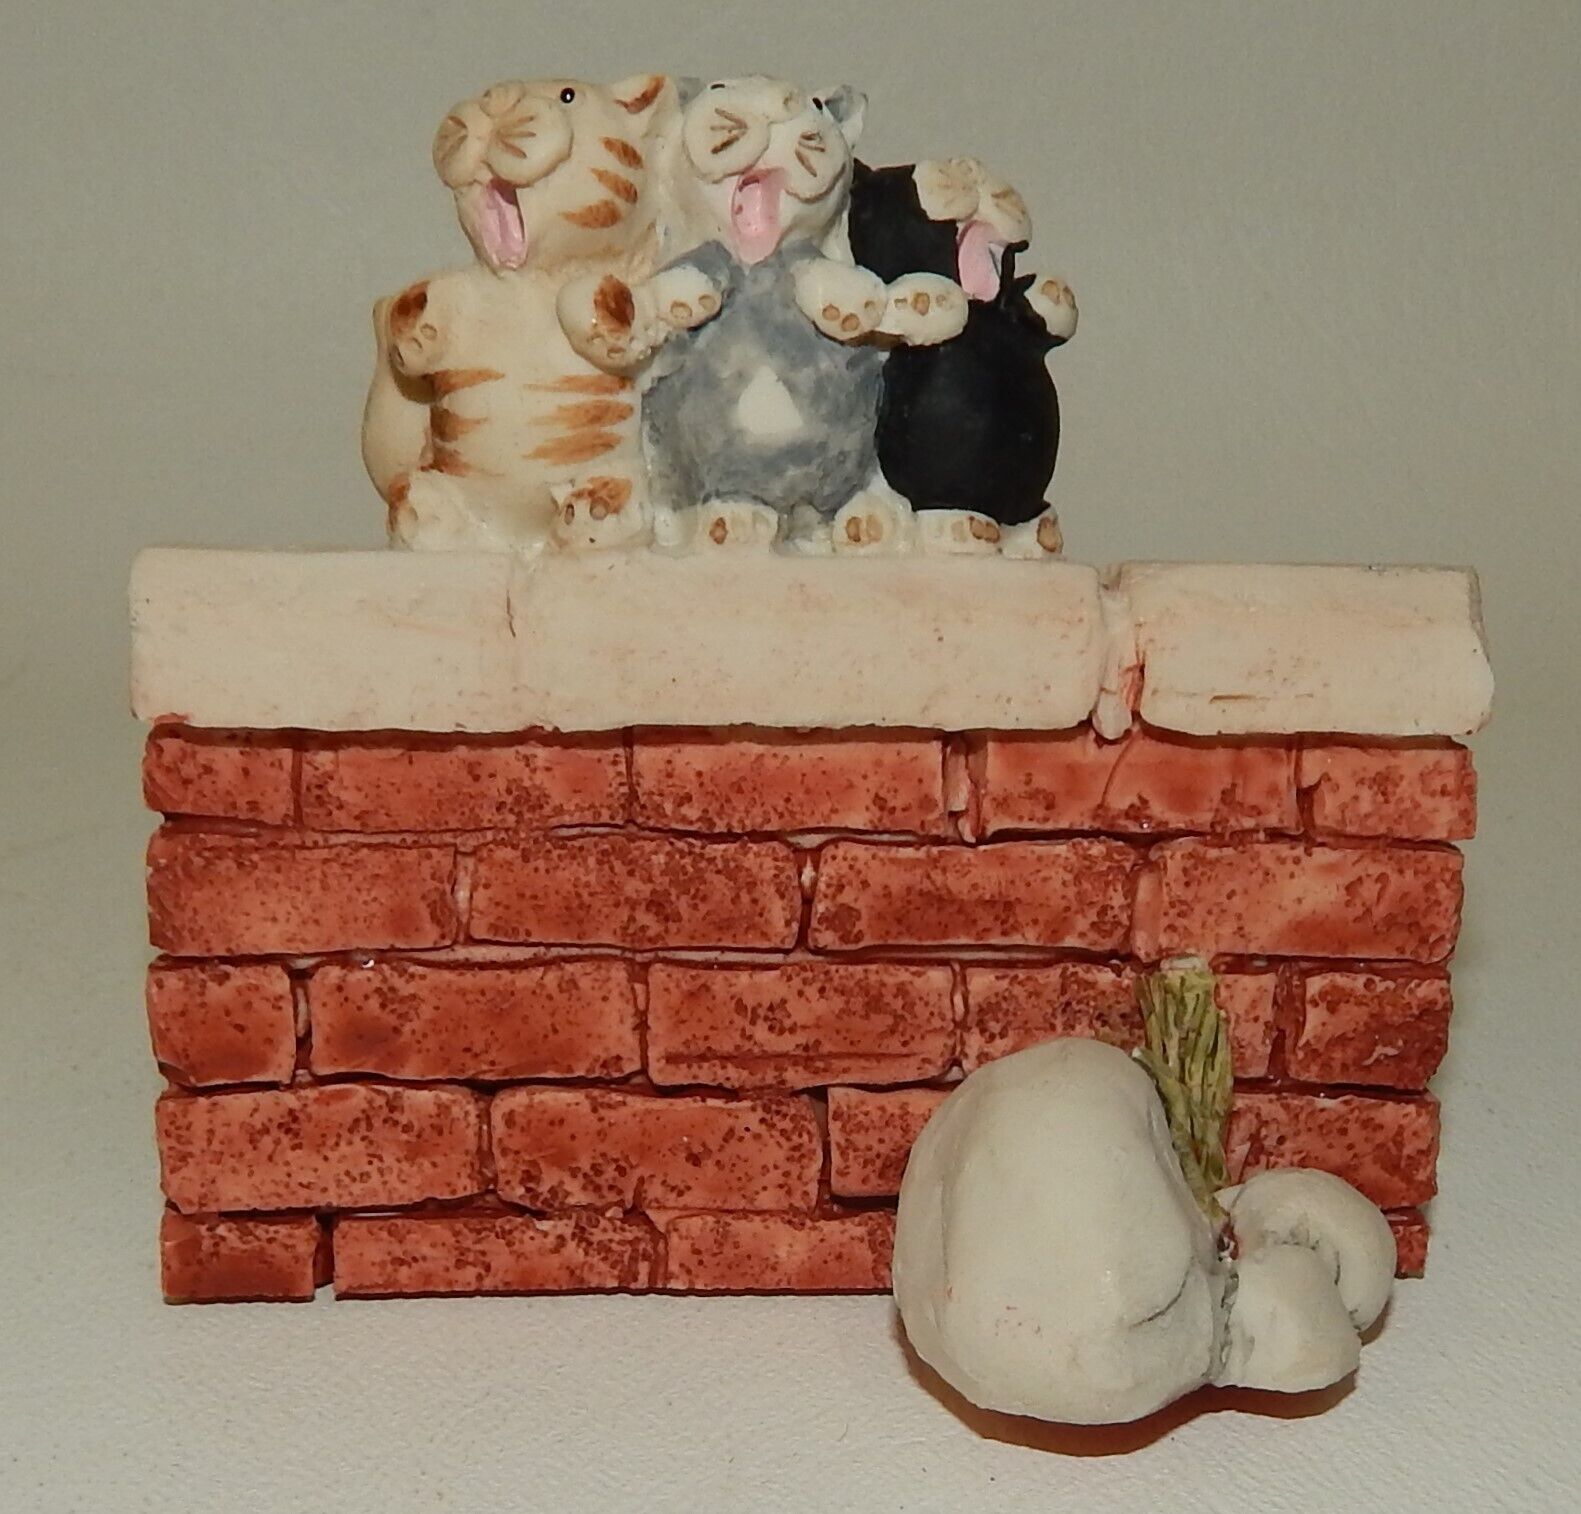 Vintage Peter Fagan Scotland Figurine - Cats Singing/Howling on Brick Fence